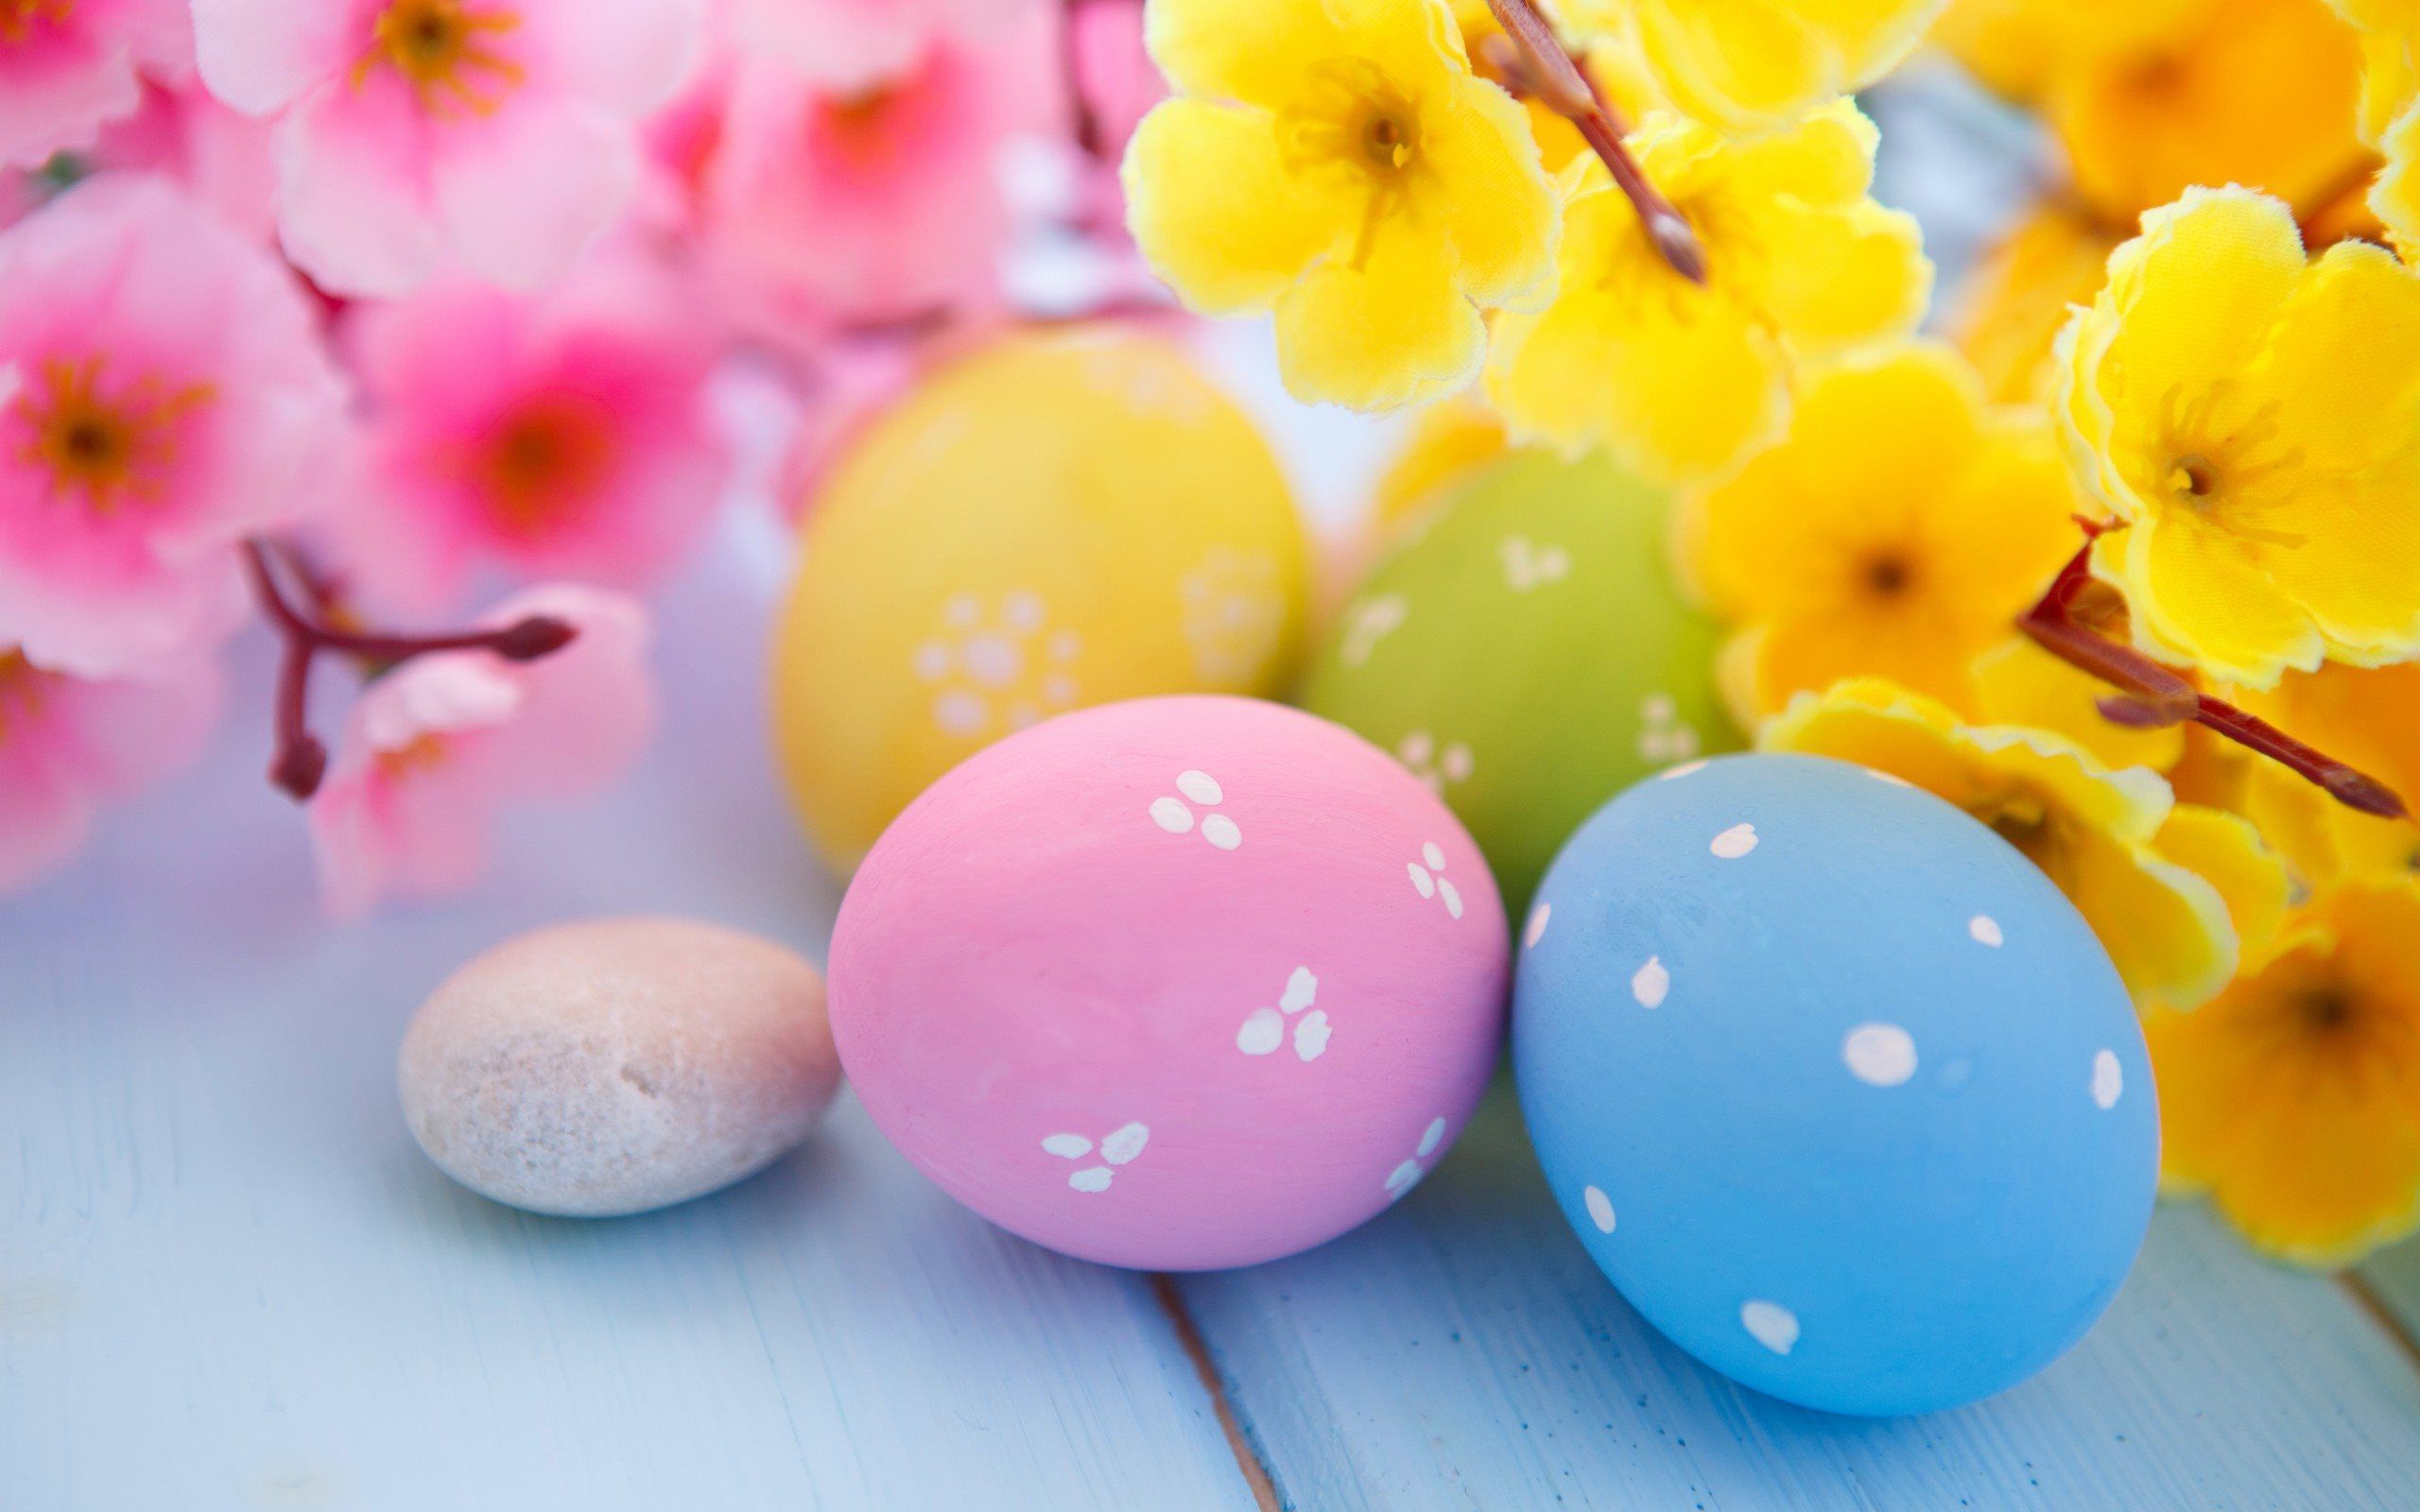 Easter Scenery Wallpapers